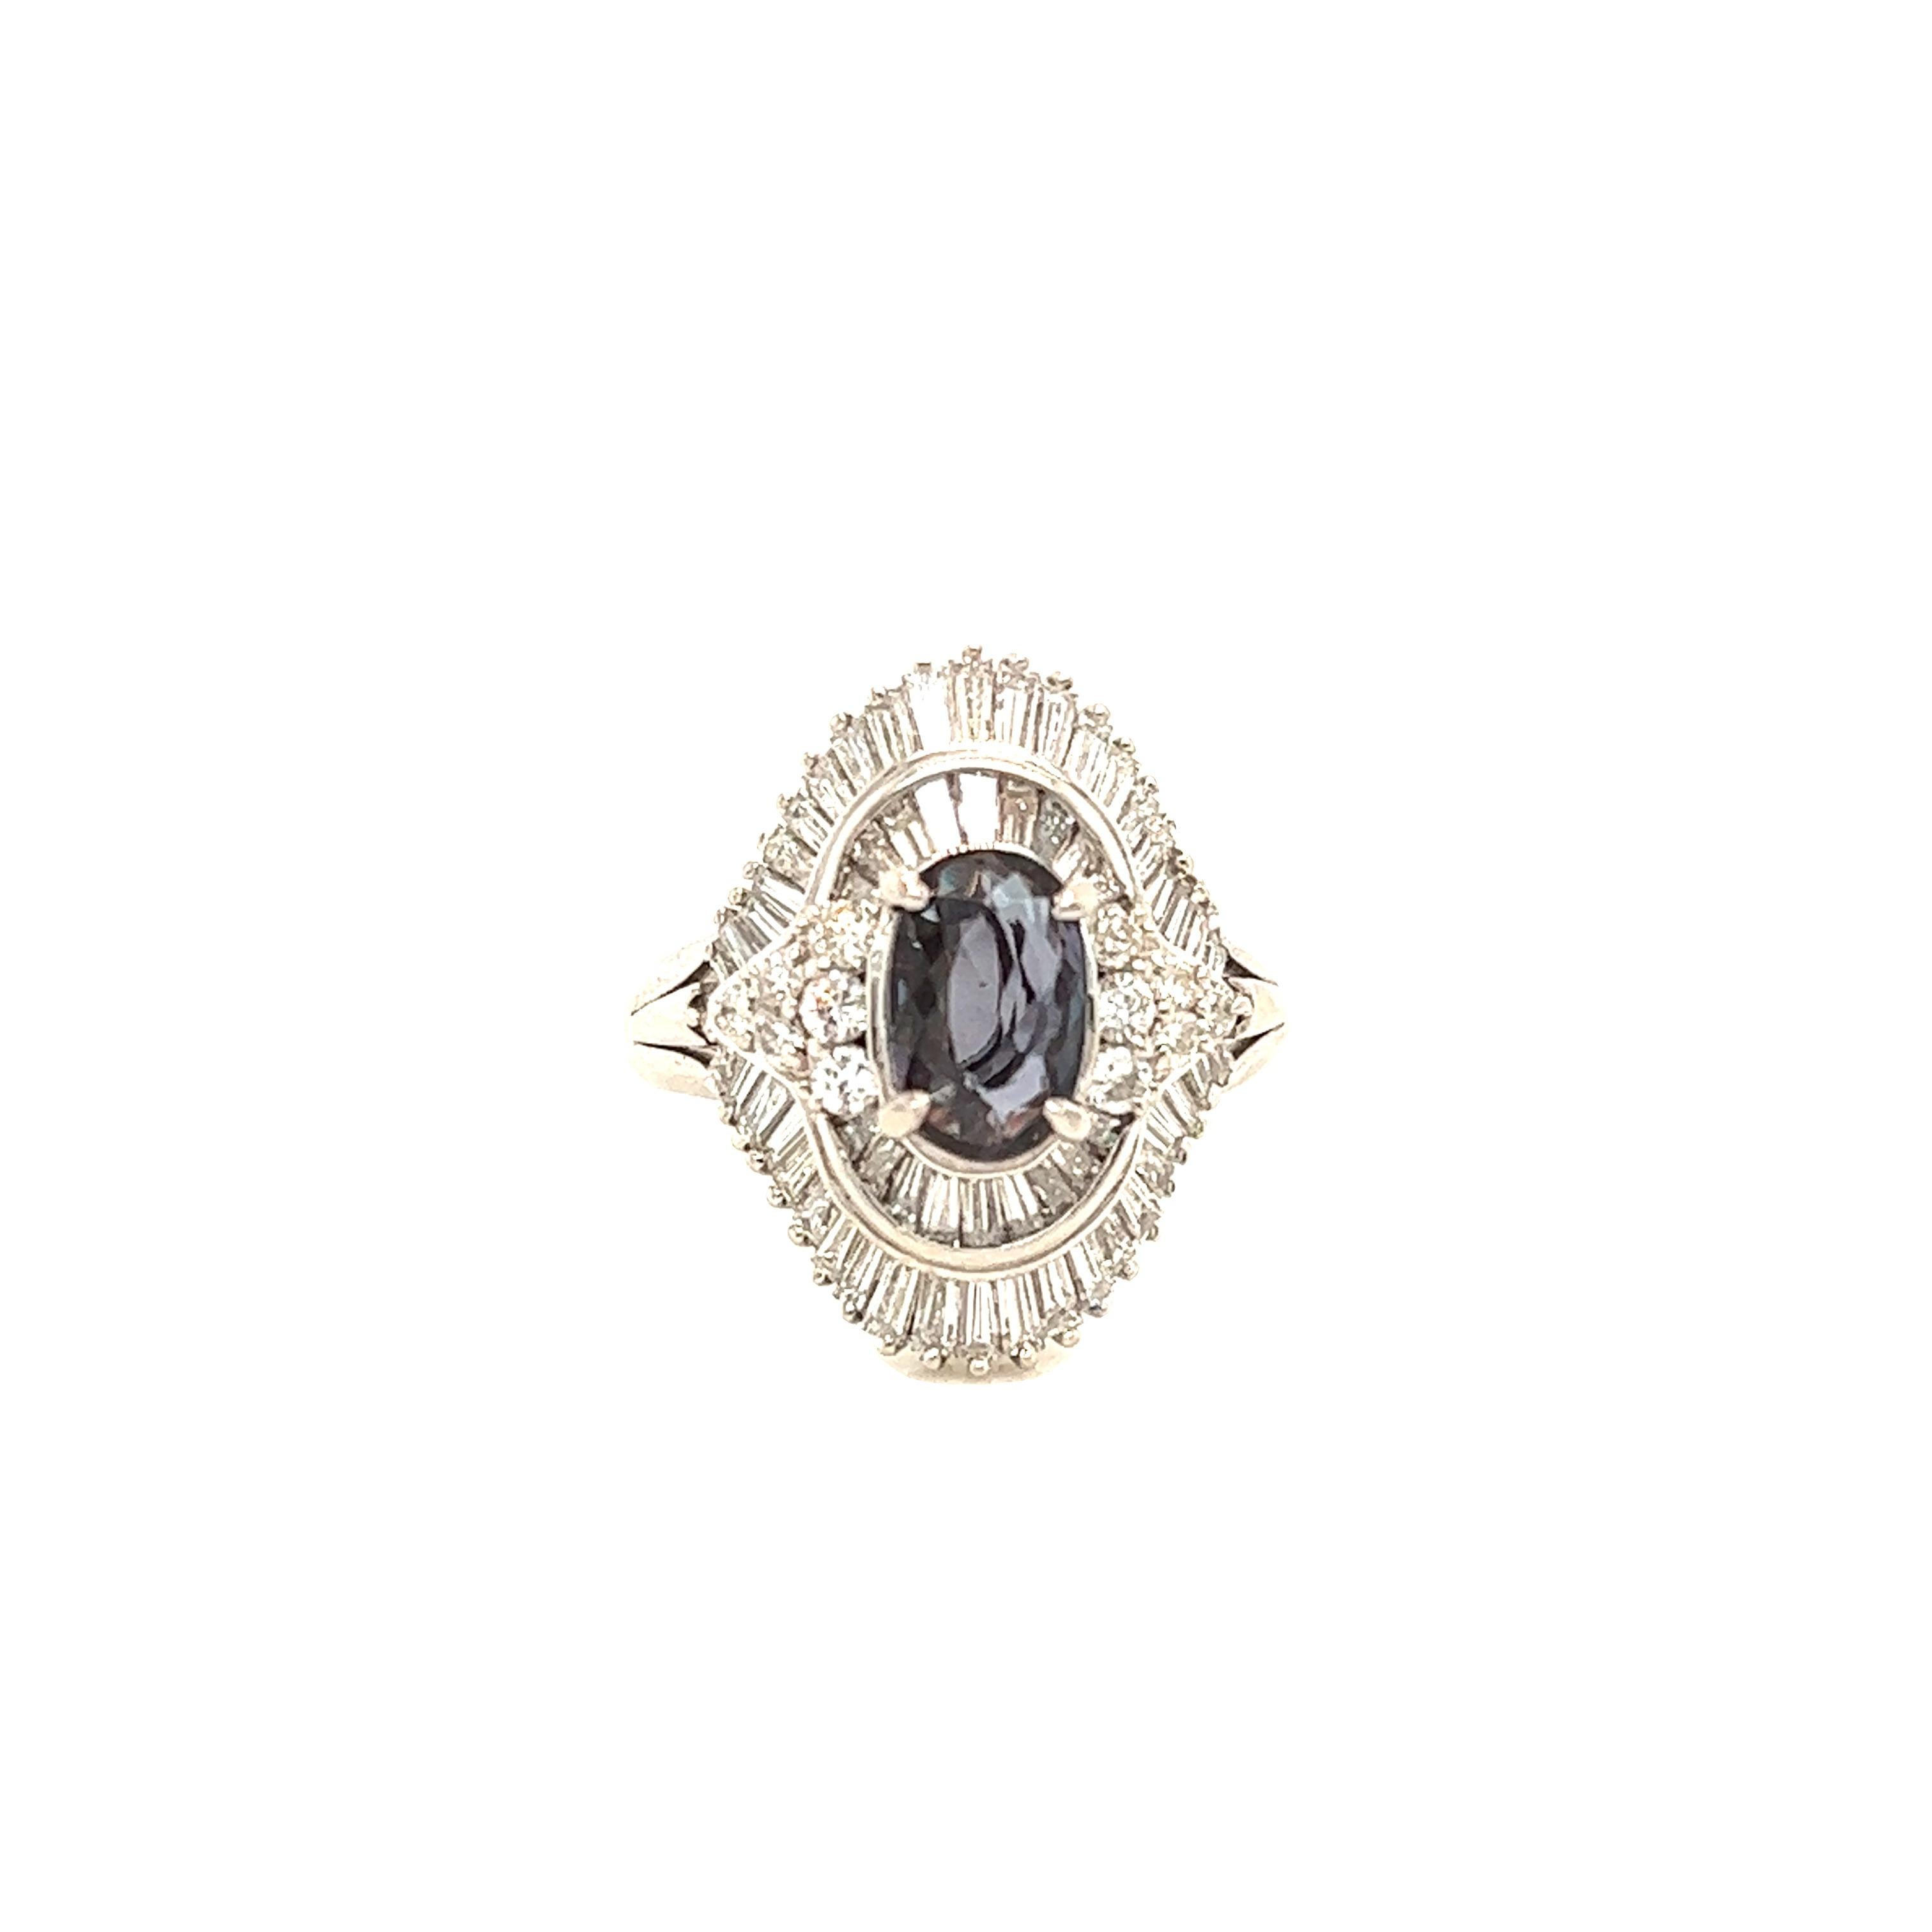 This is a gorgeous natural AAA quality oval Alexandrite surrounded by dainty diamonds that is set in a vintage white gold setting. This ring features a natural 1.40 carat oval alexandrite that is certified by the Gemological Institute of America